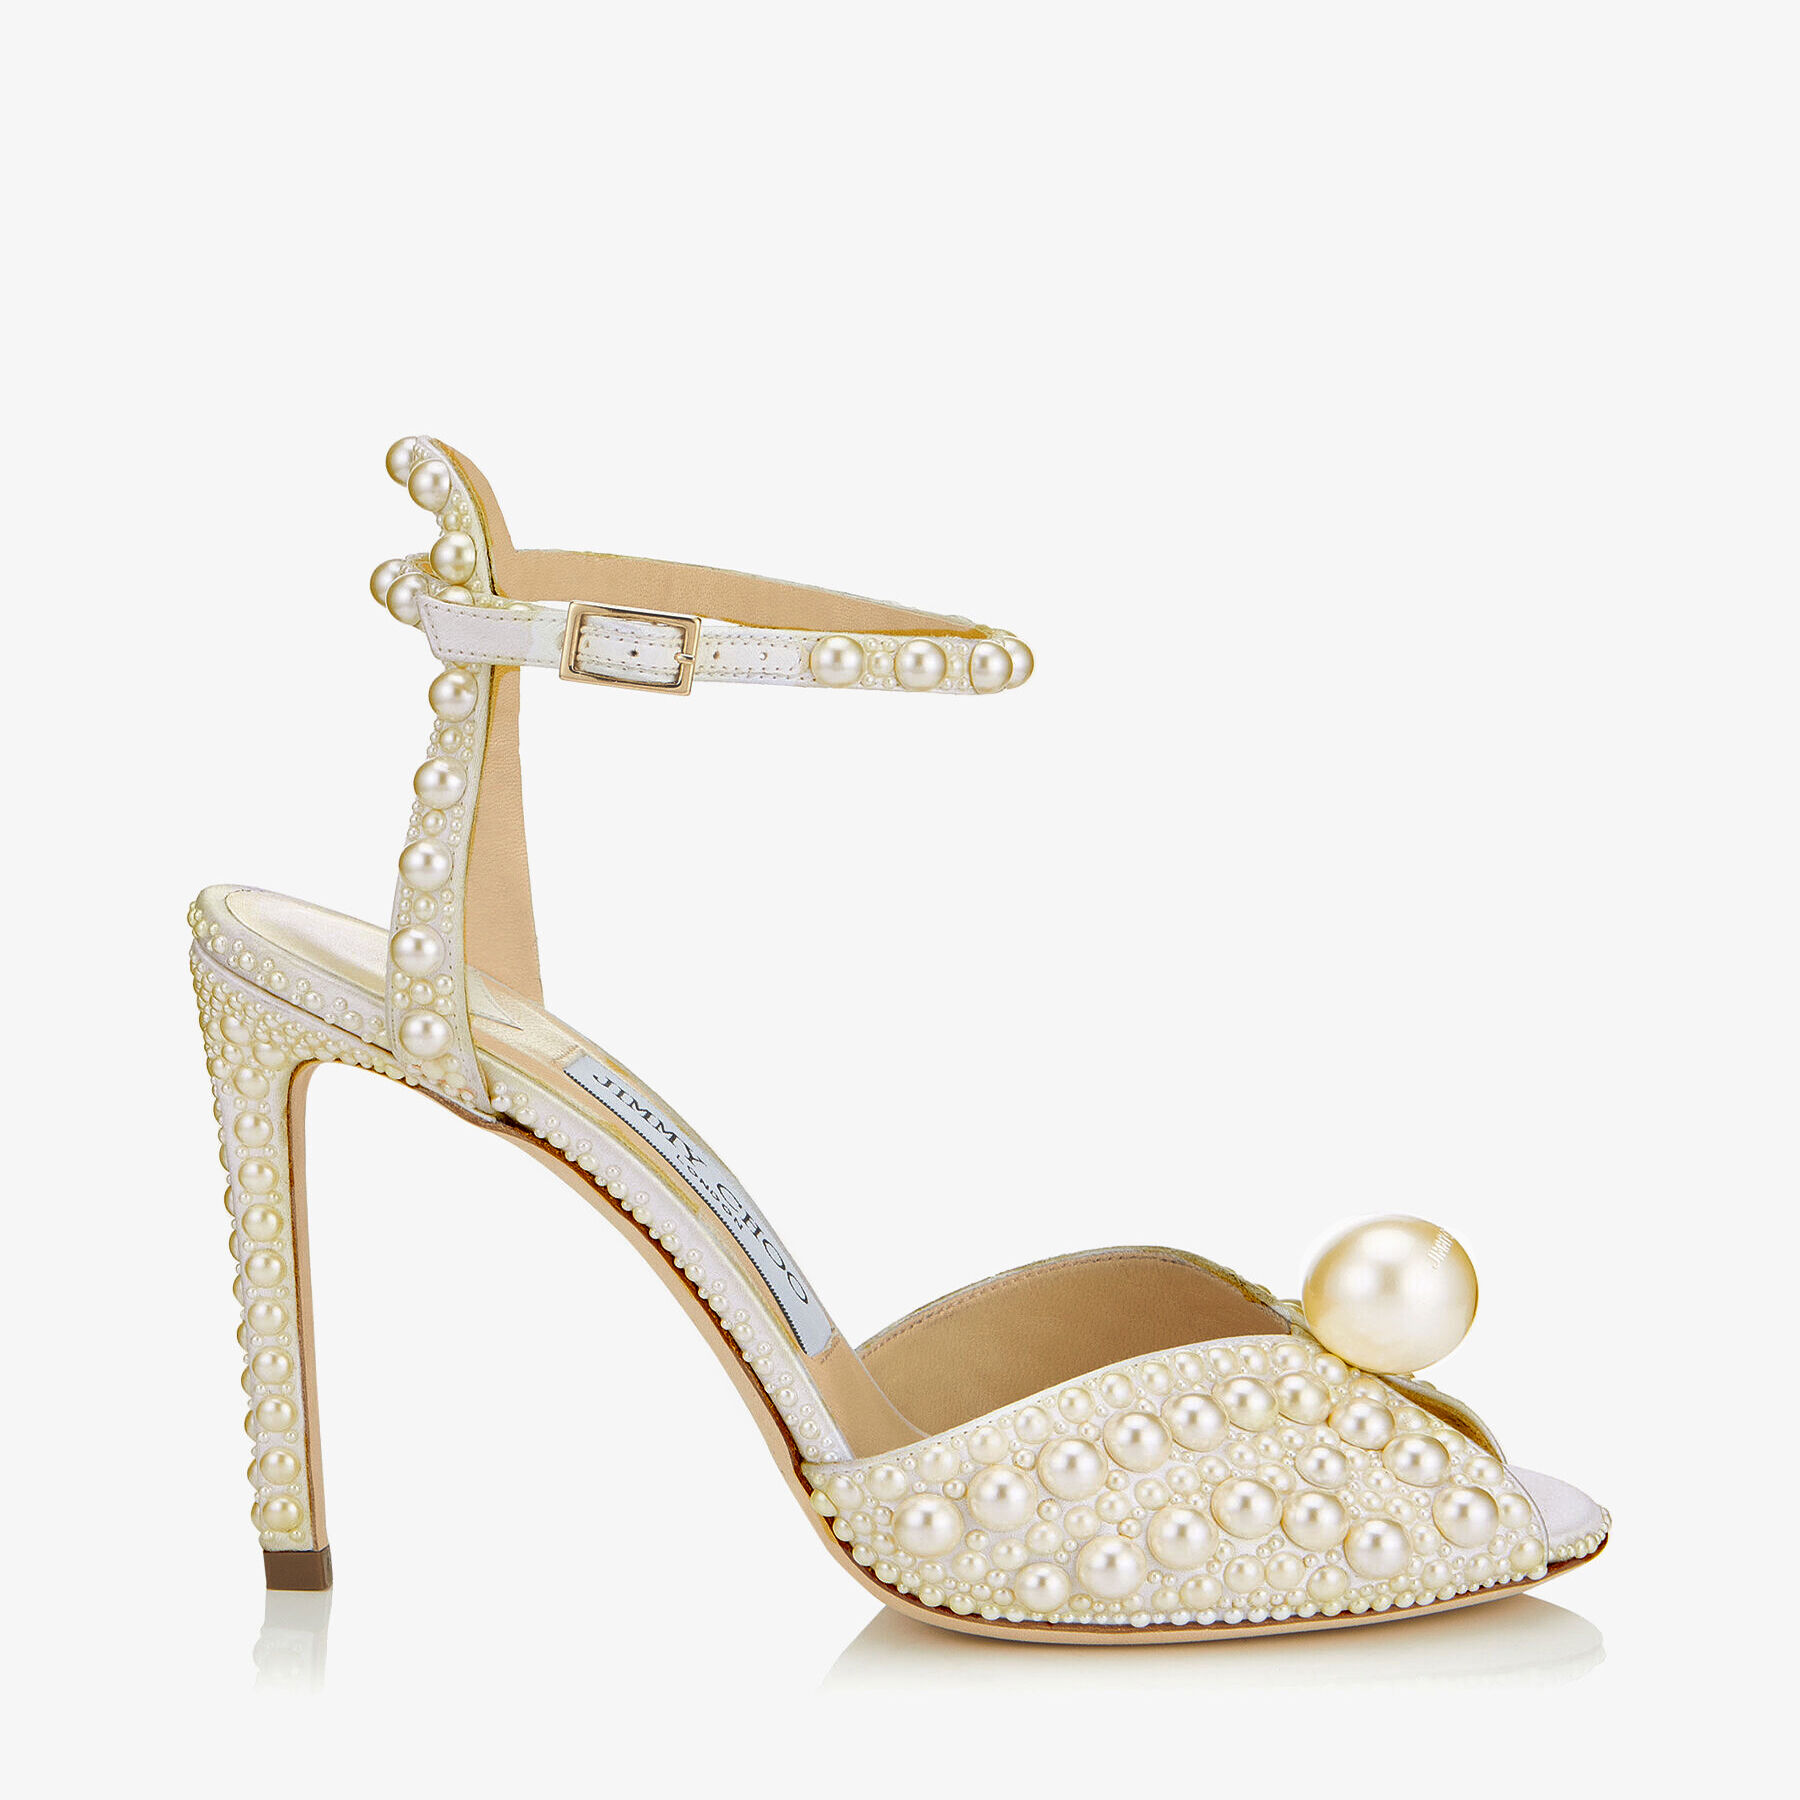 White Satin Sandals with All Over Pearls | SACORA 100 | Autumn 